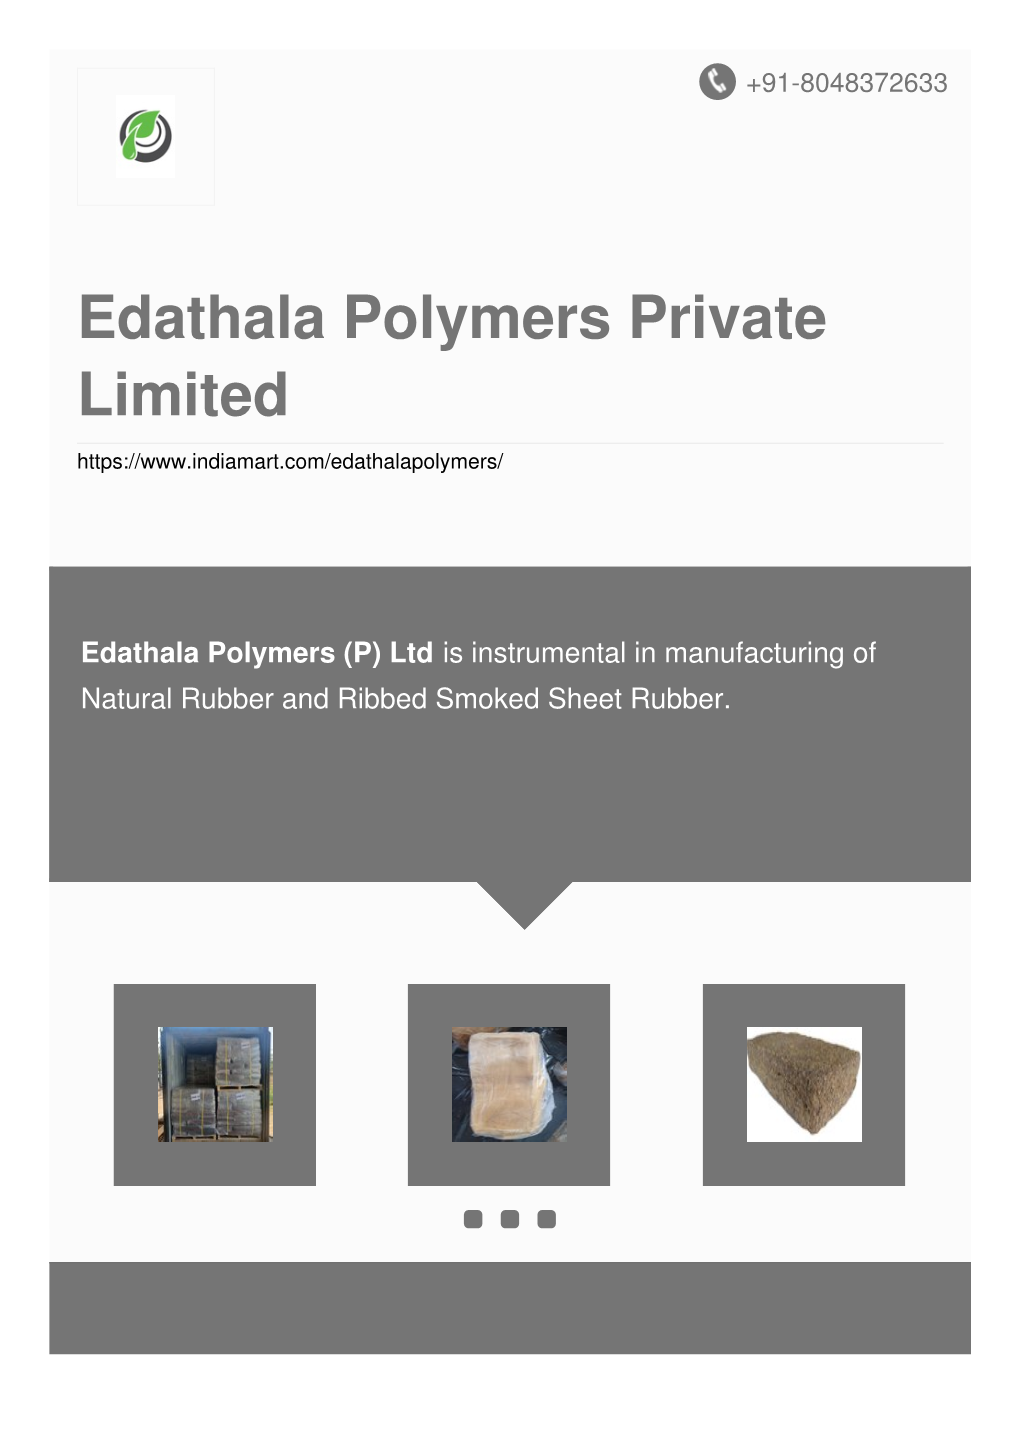 Edathala Polymers Private Limited